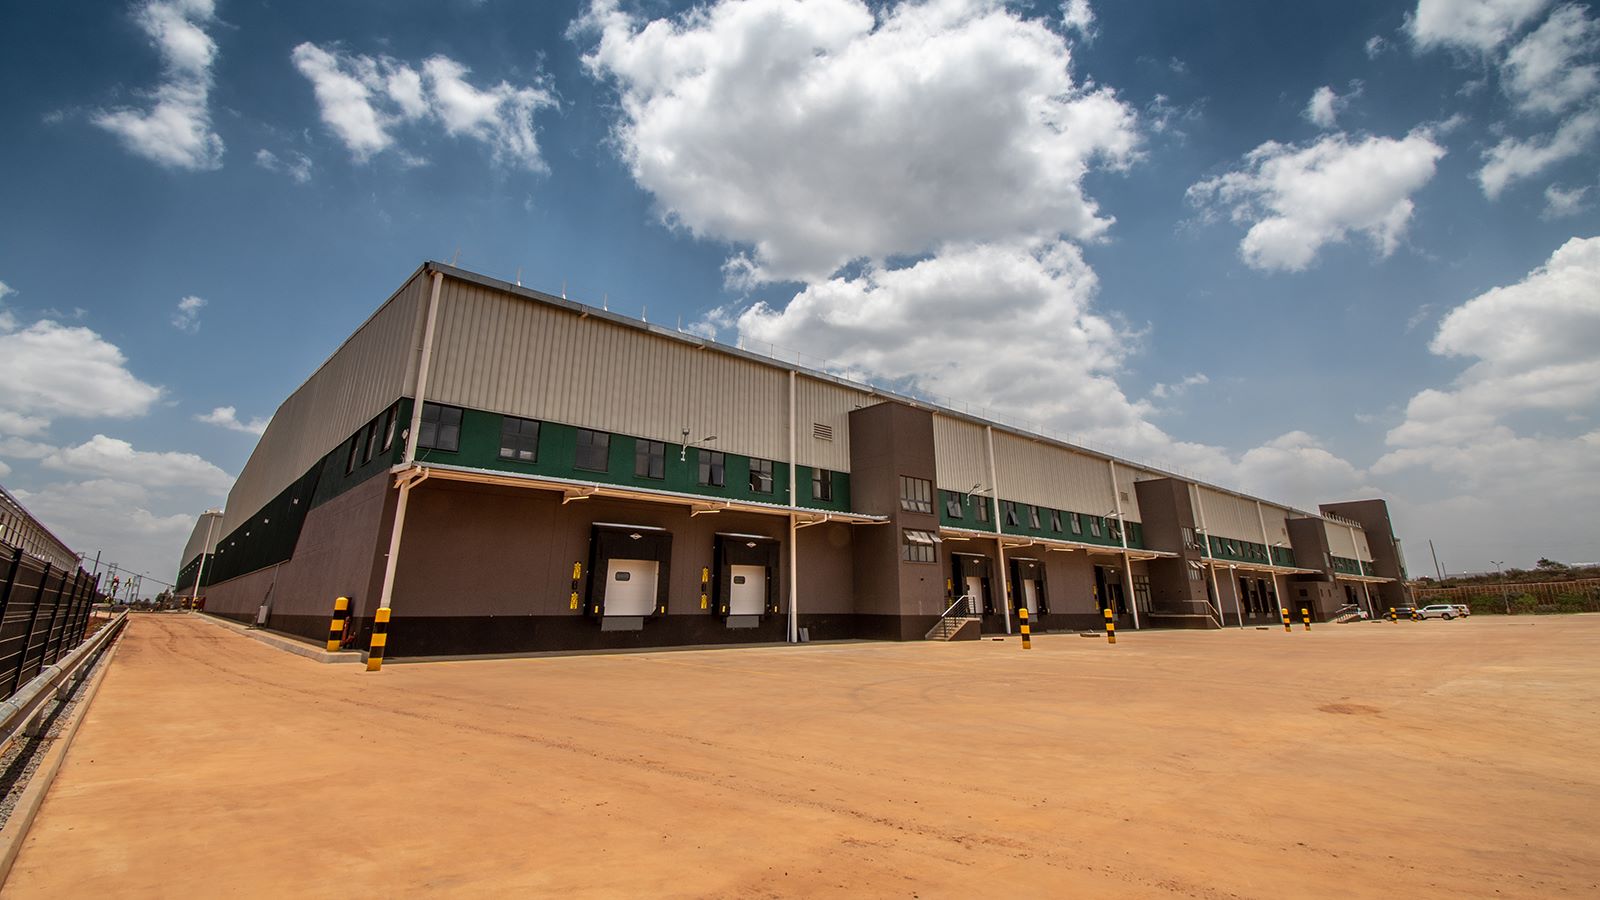 Warehouse, Factory & Industrial Property - Mace Group